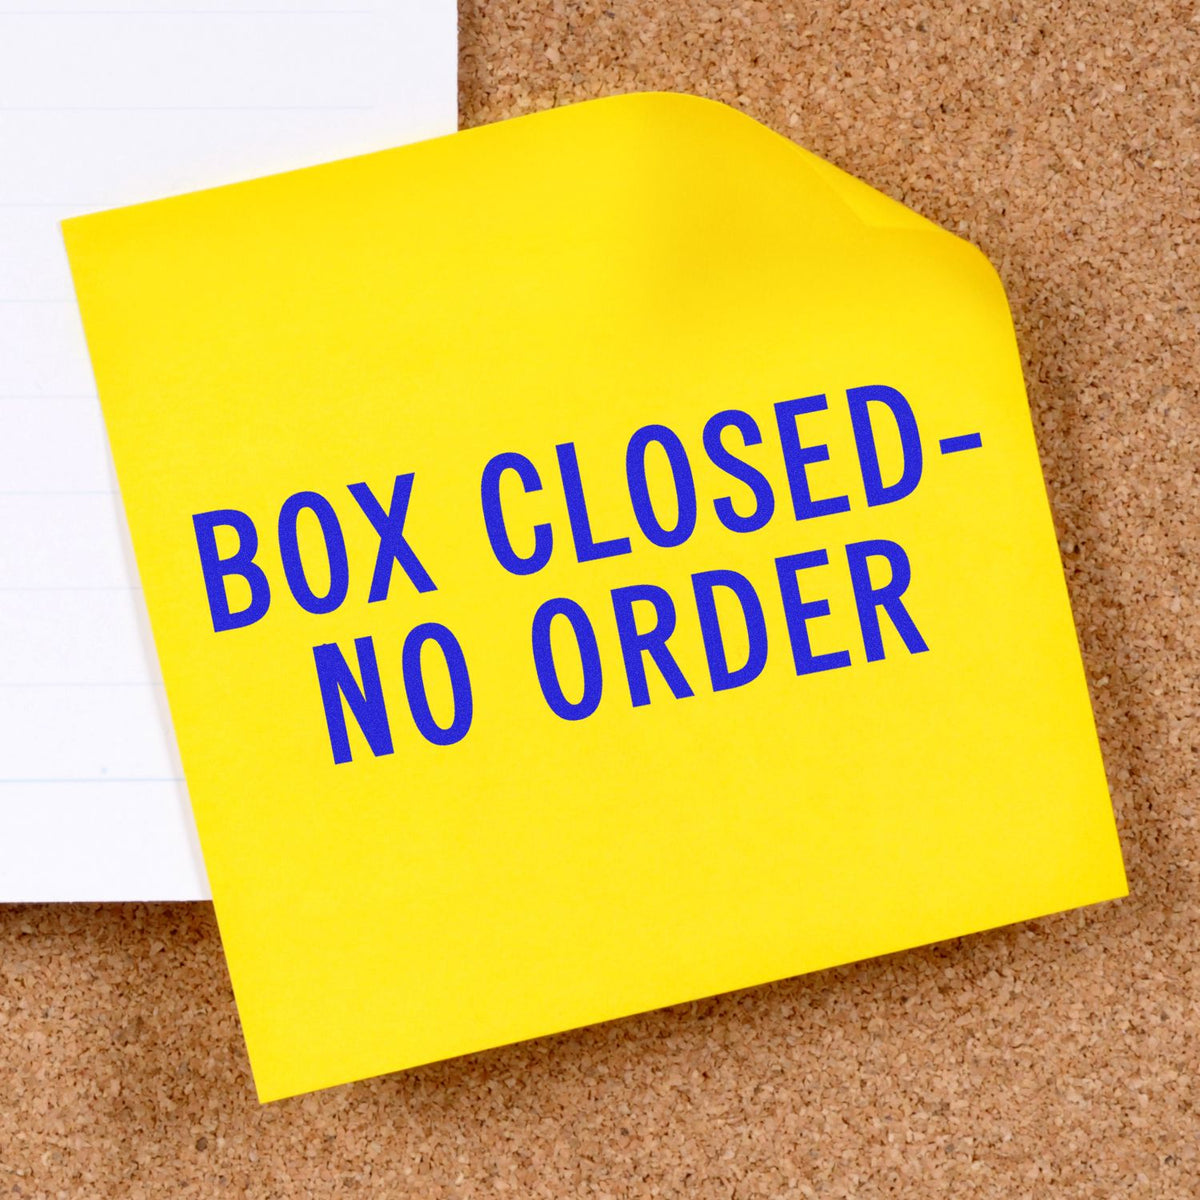 Box Closed No Order Rubber Stamp In Use Photo